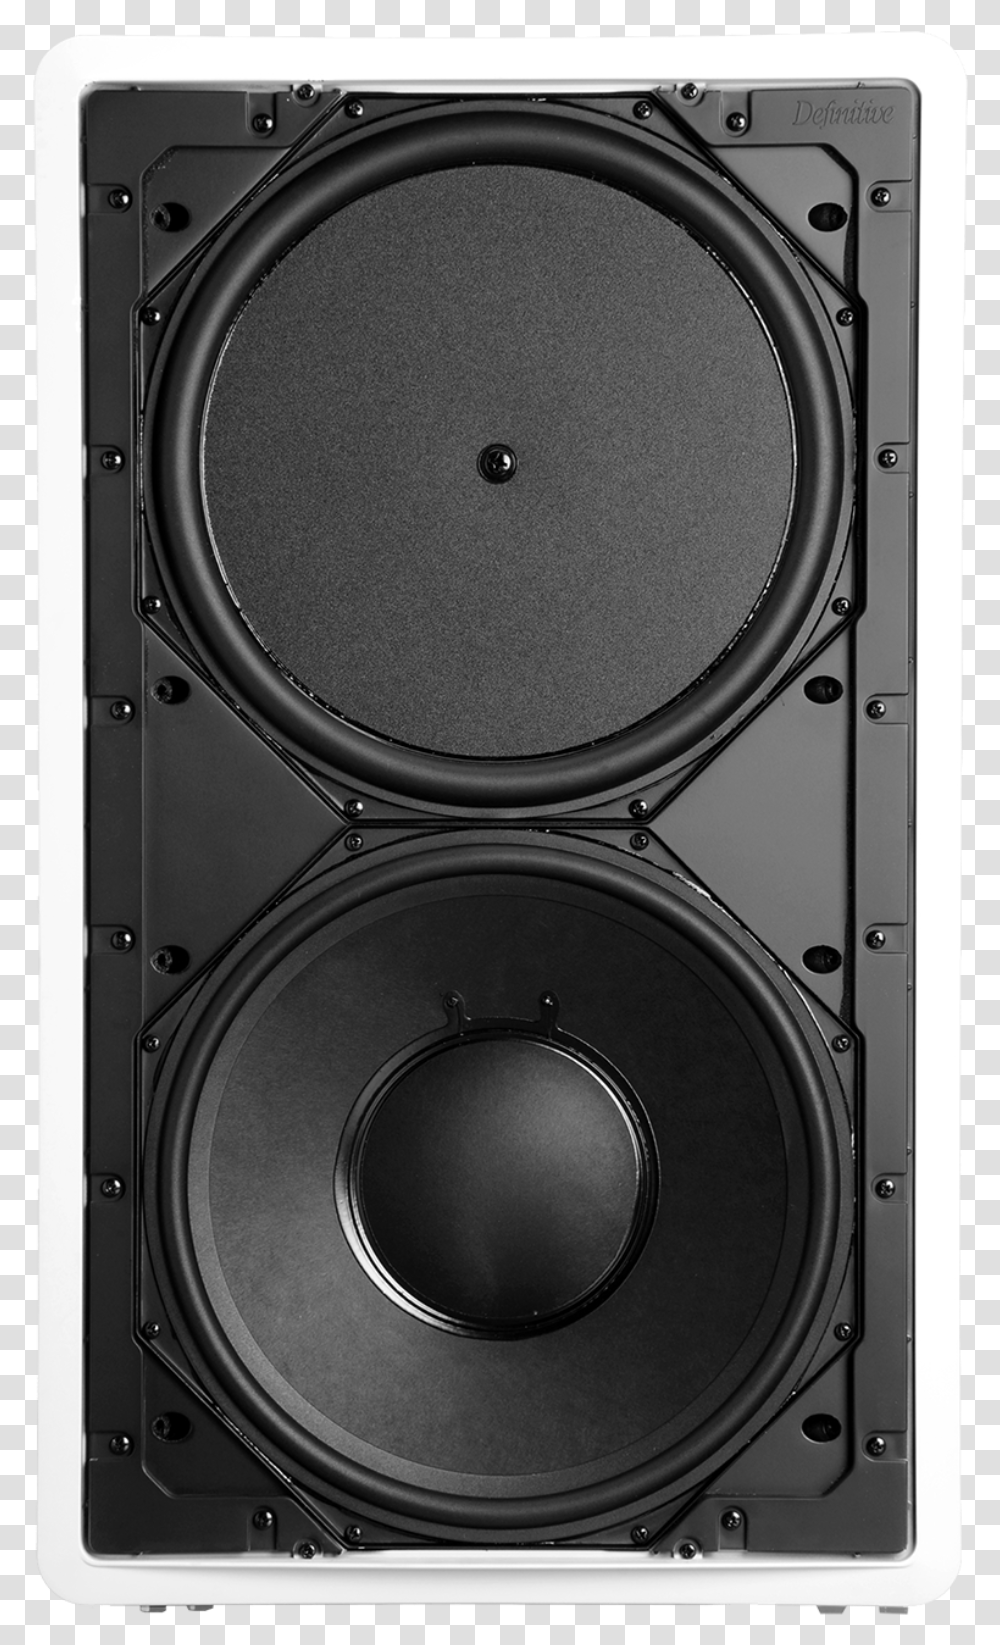 Definitive Technology Iw Sub, Speaker, Electronics, Audio Speaker, Stereo Transparent Png